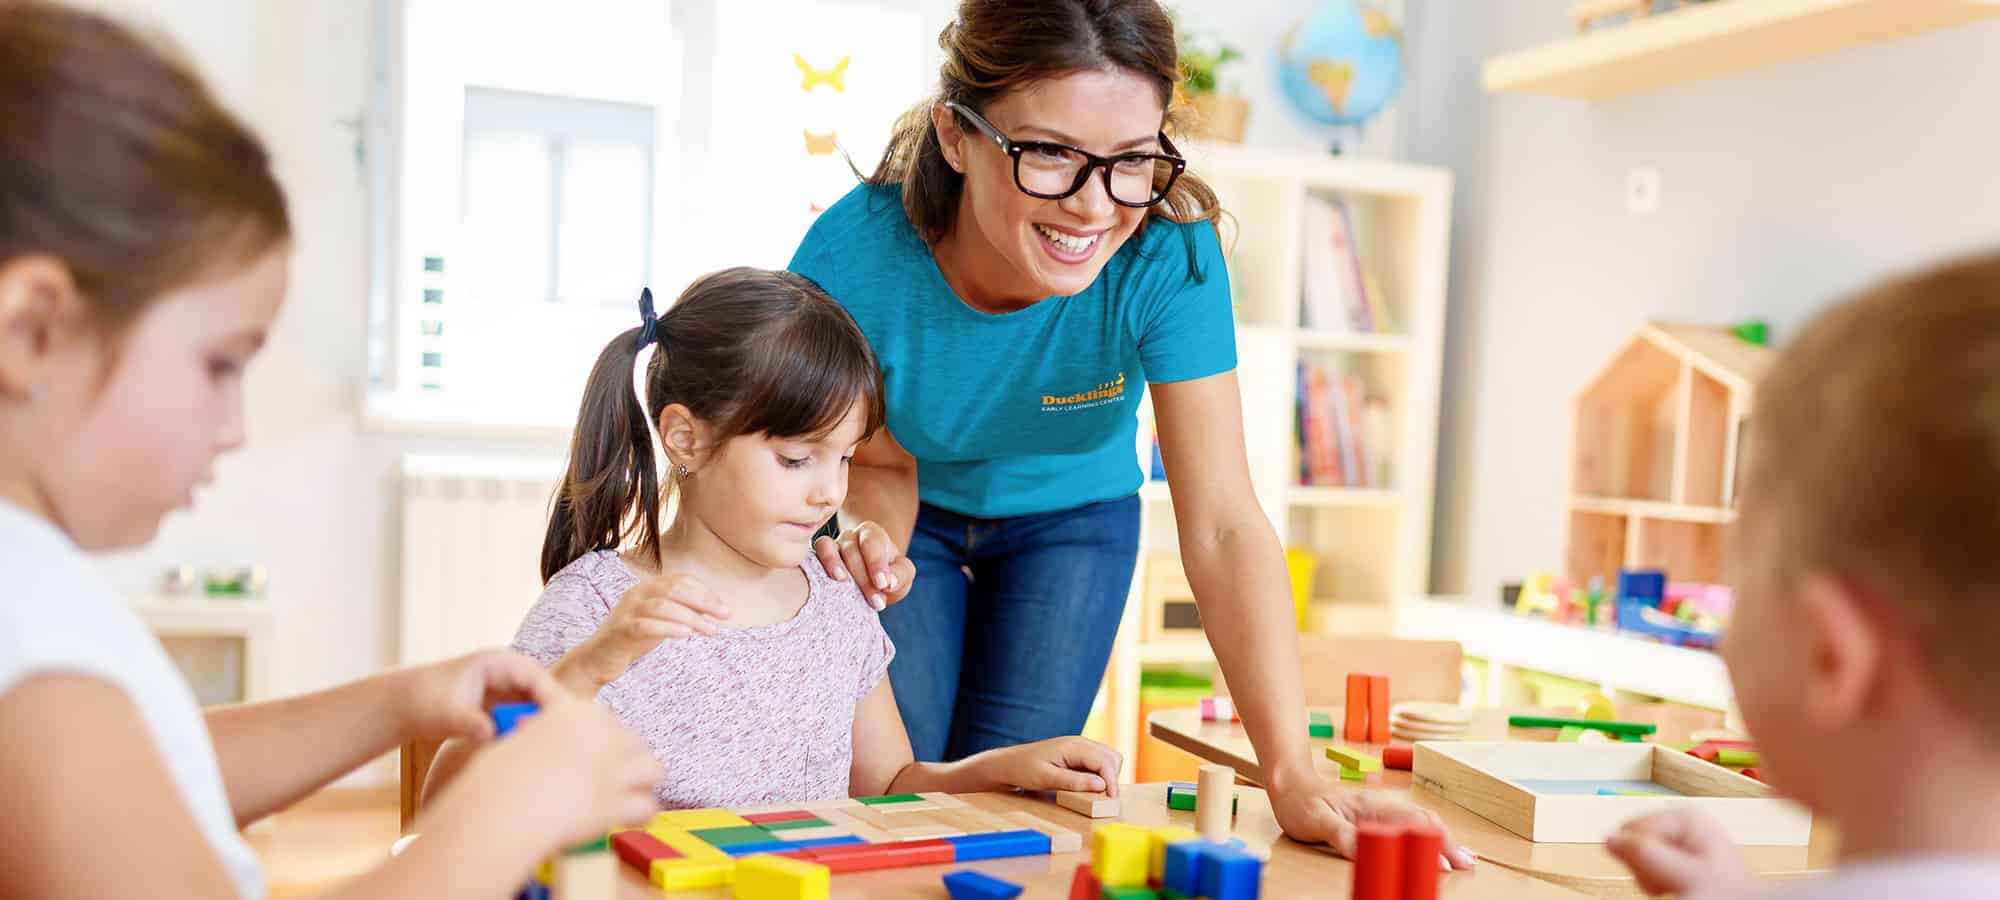 Childcare Jobs in Wallingford PA